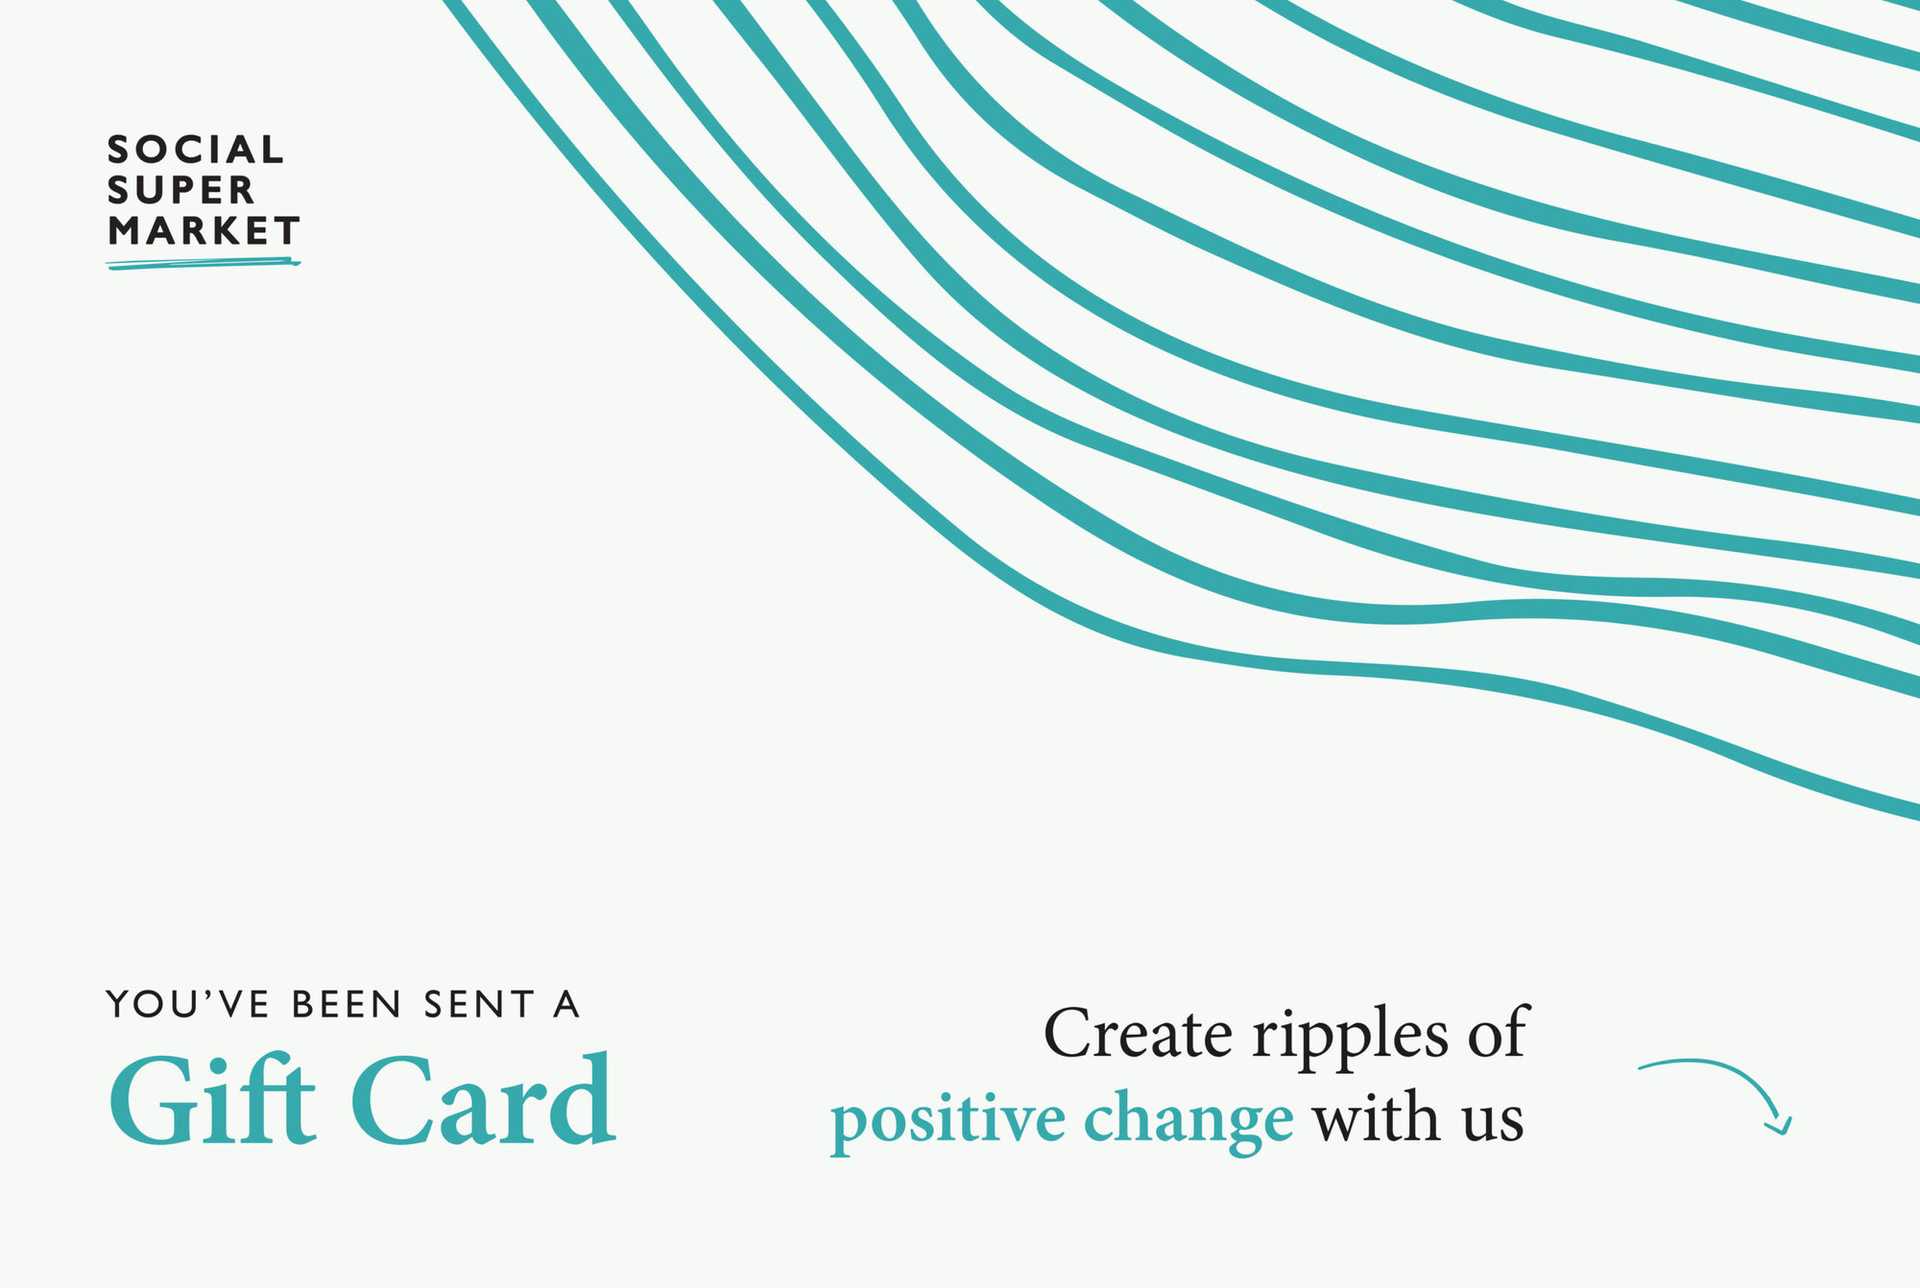 Send them a Social Supermarket gift card straight to their inbox and let them choose from 2,000 social impact finds.